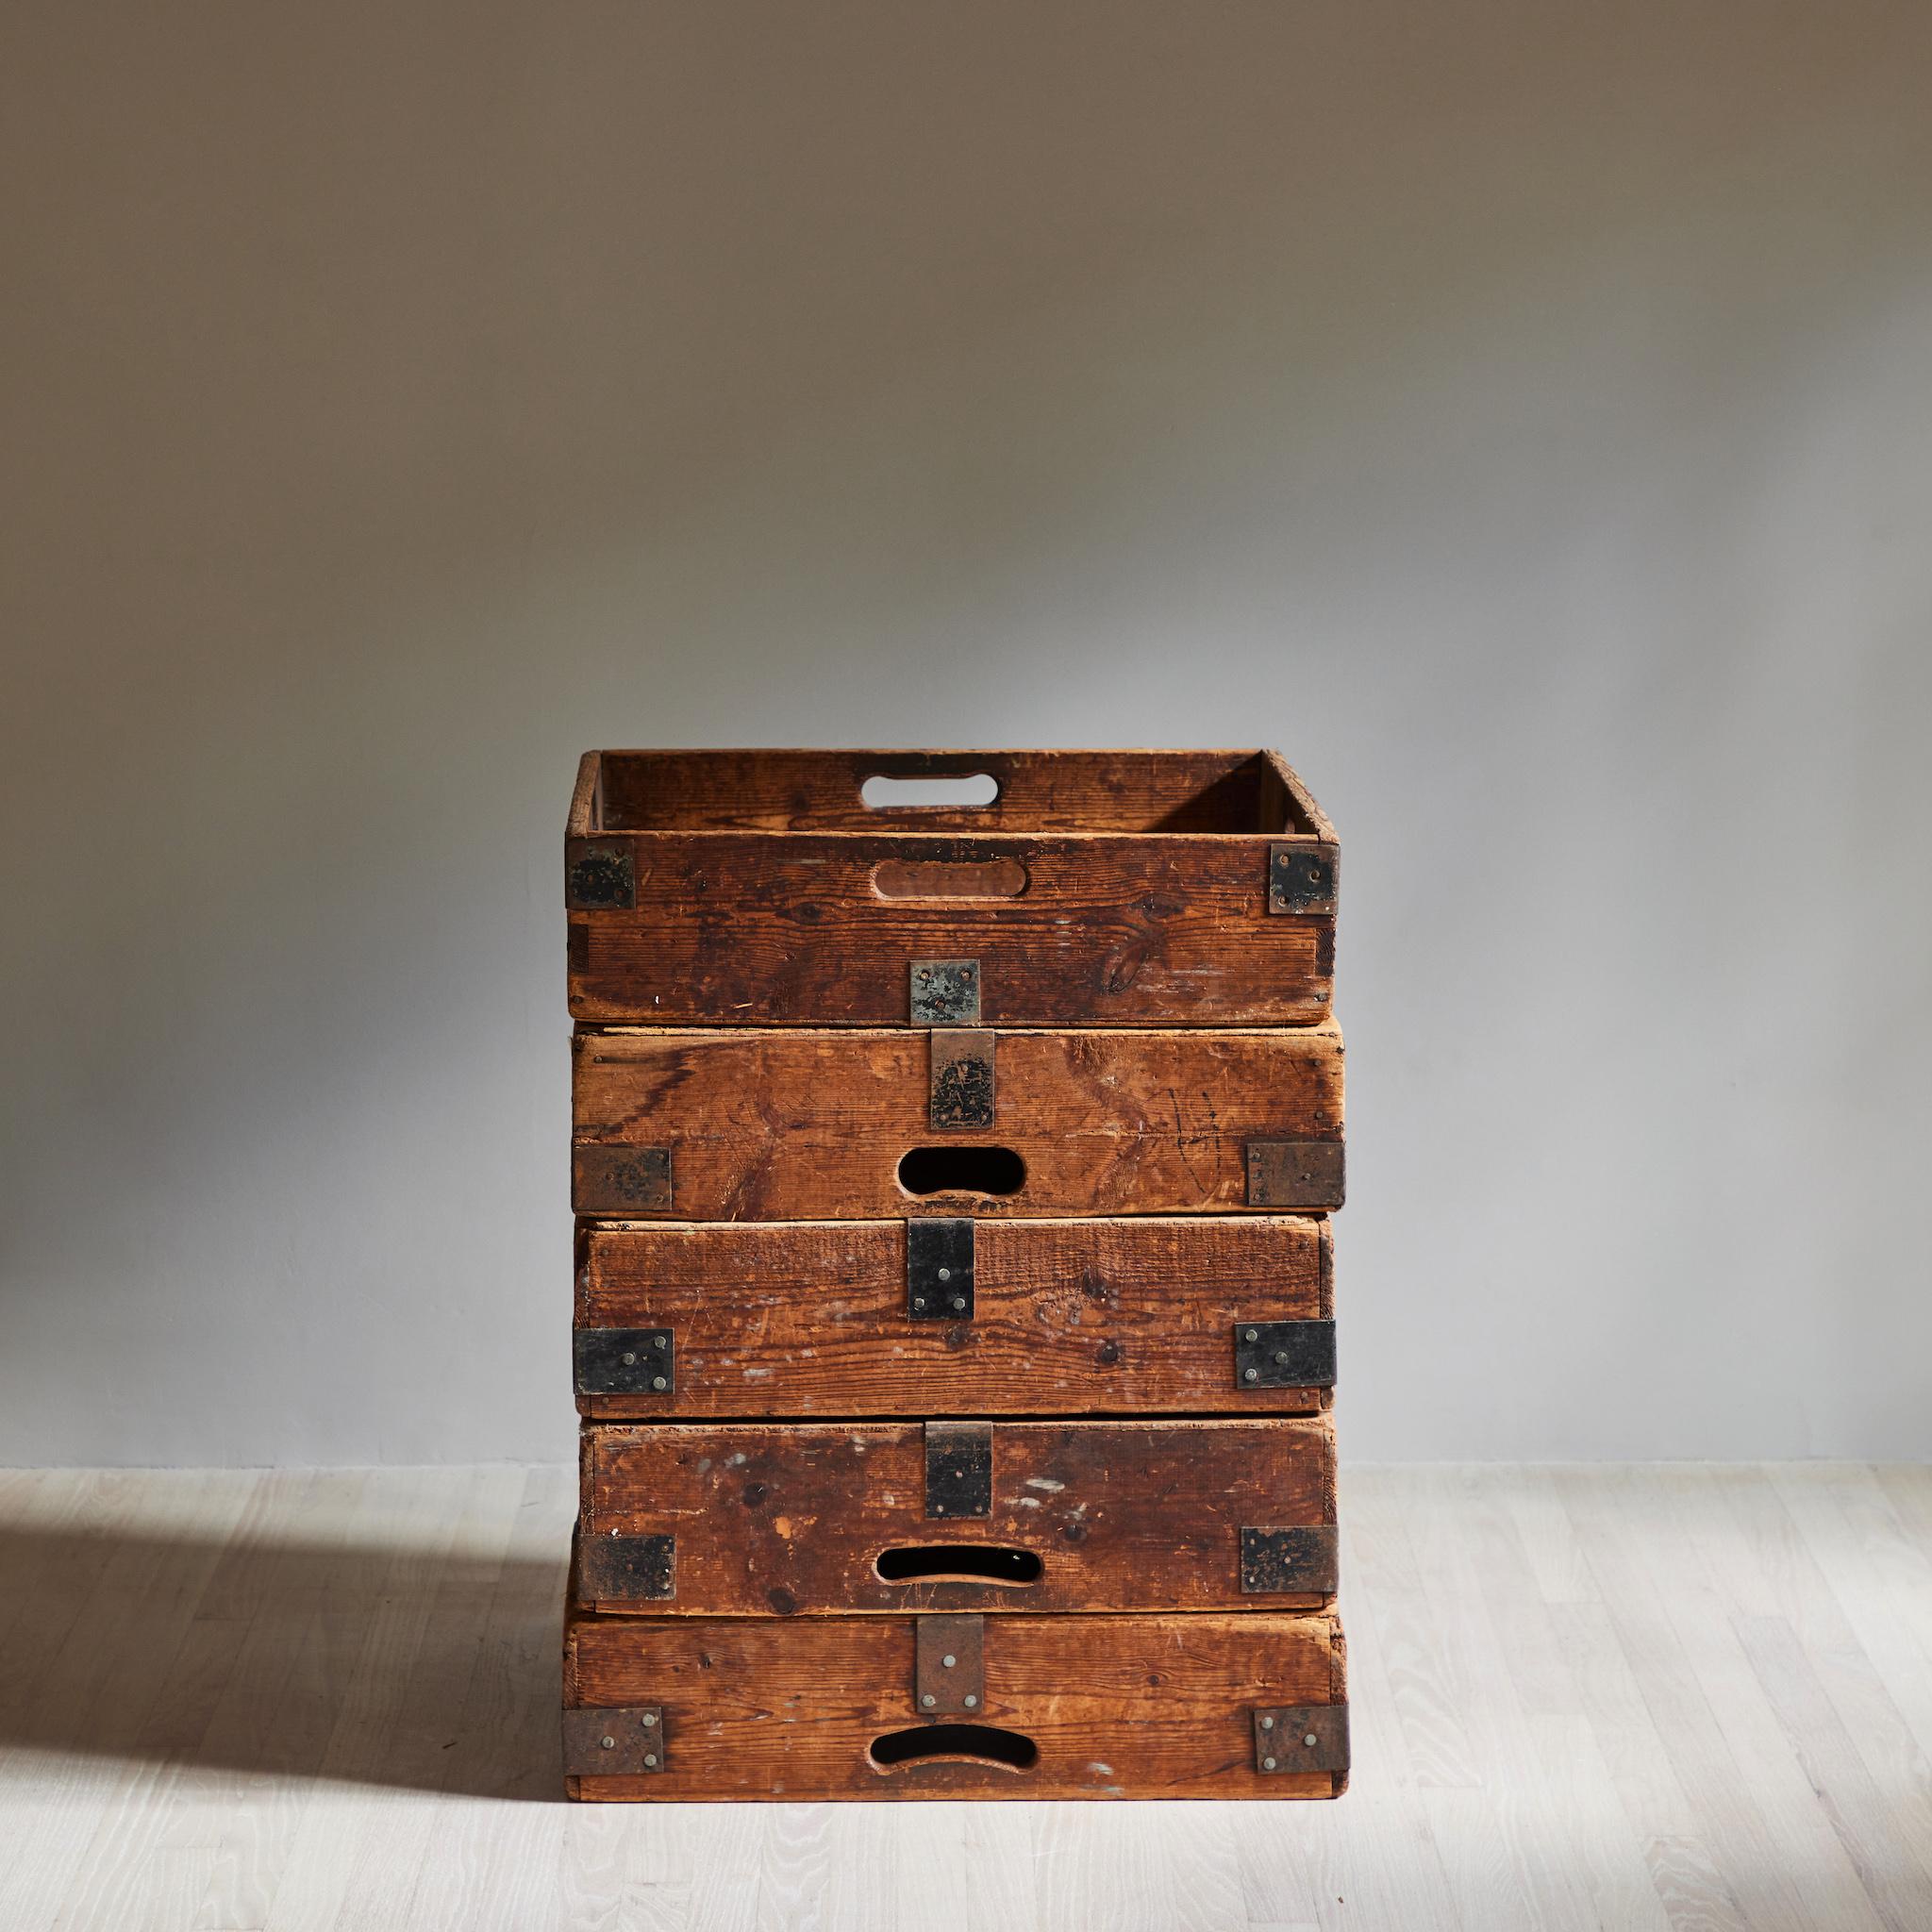 Set of four early 20th-century French wooden planter boxes, originally used to transport pottery. With utilitarian accents and a rustic patina, these industrial wooden boxes bring the feeling of a studio into any space. Can be stacked or displayed